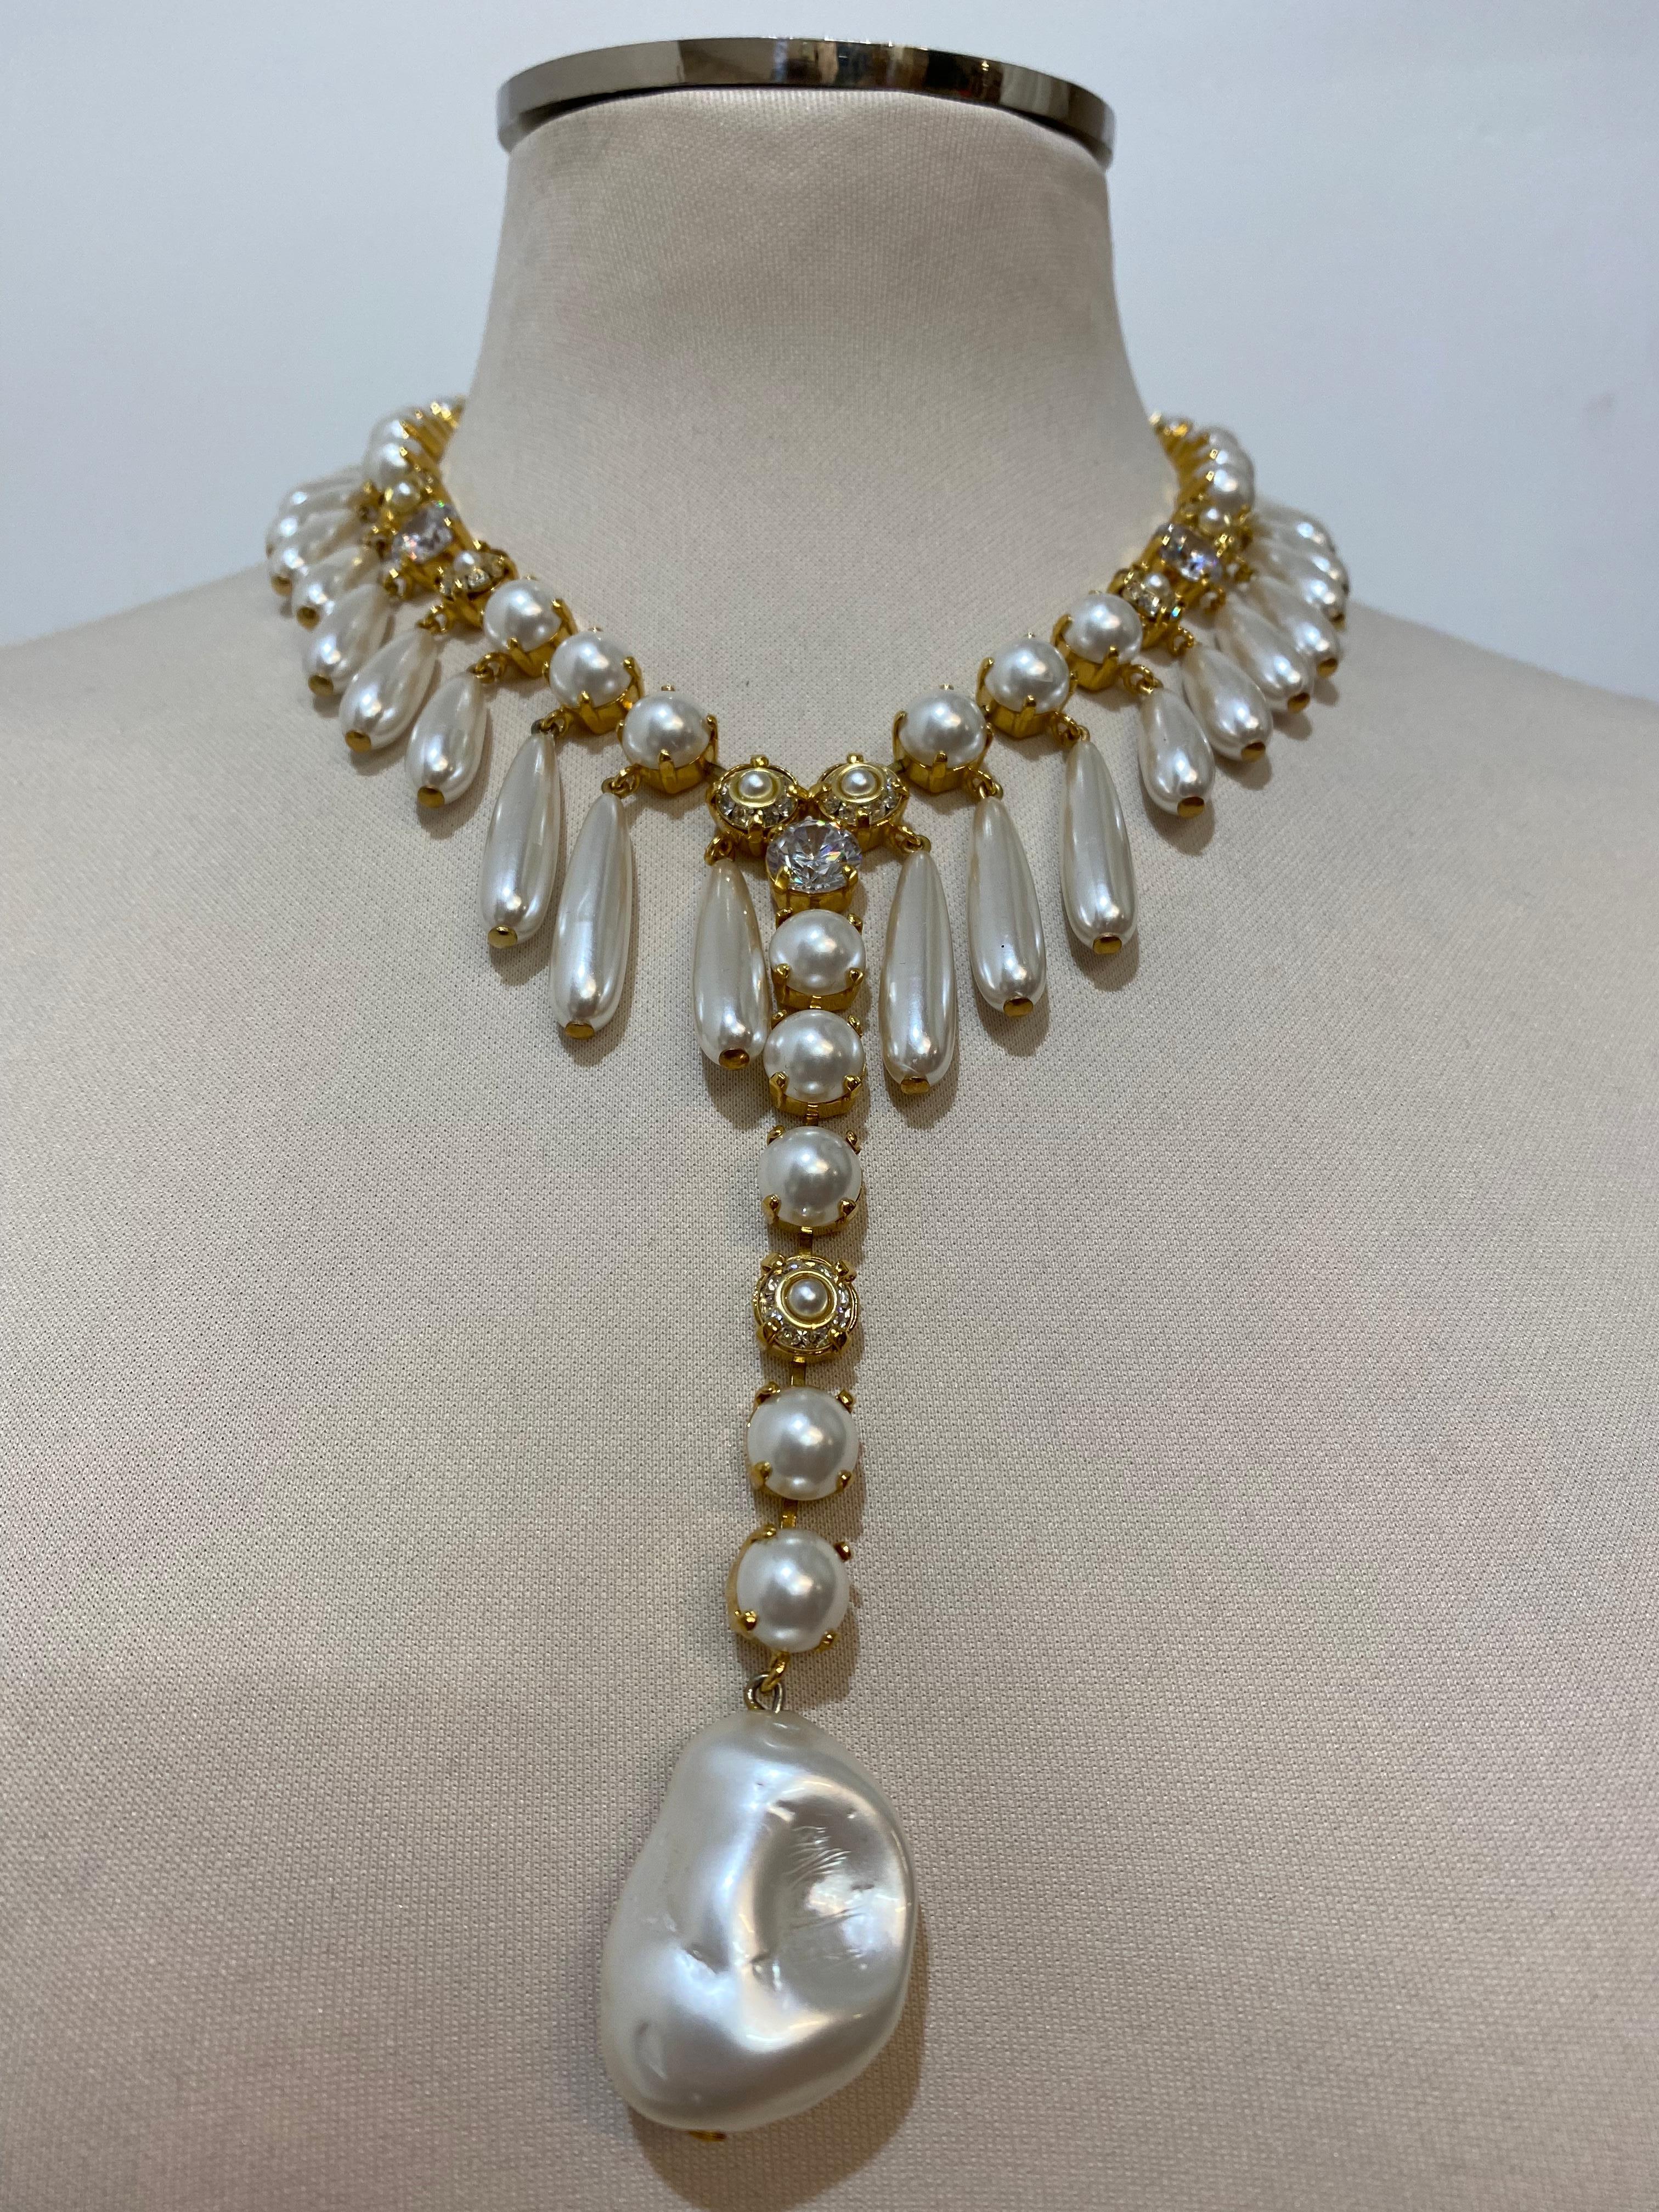 Beautiful masterpiece by Carlo Zini
One of the world greatest bijoux designers
Multi drops style
Non allergenic brass
18 KT 3 MicronGold dipped
Long faux pearls
Big scaramazza pearl
100% Artisanal work made in Milano
Worldwide express shipping